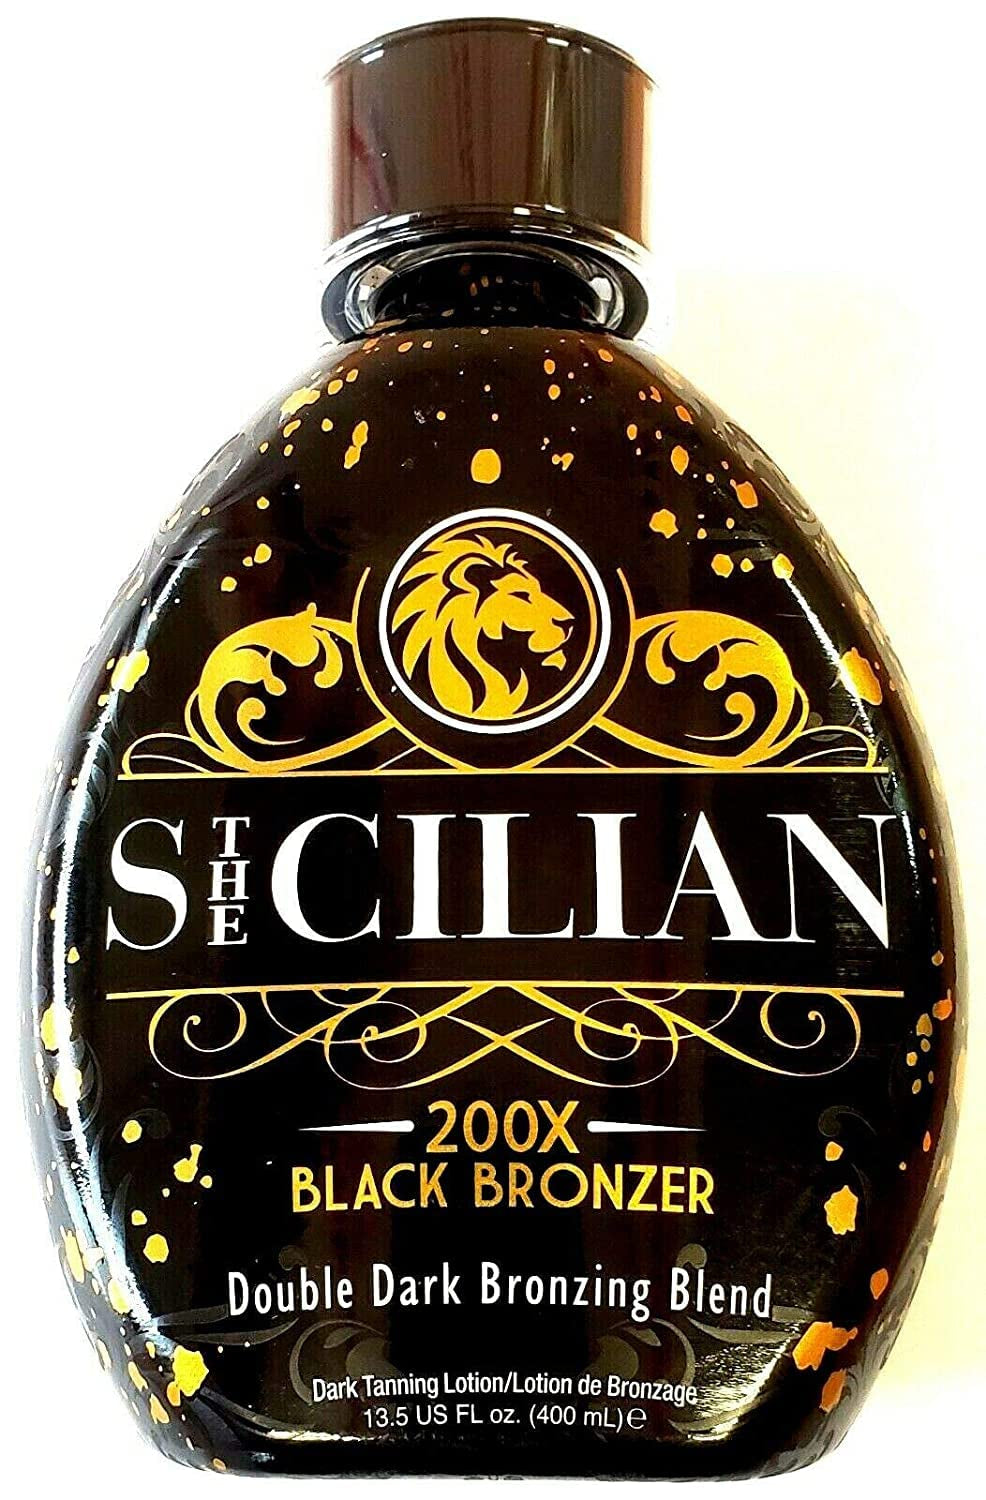 "Radiant Glow 200X Dark Black Bronzer Tanning Lotion - Ultimate Skin Nourishment for a Luxurious Sun-Kissed Tan"